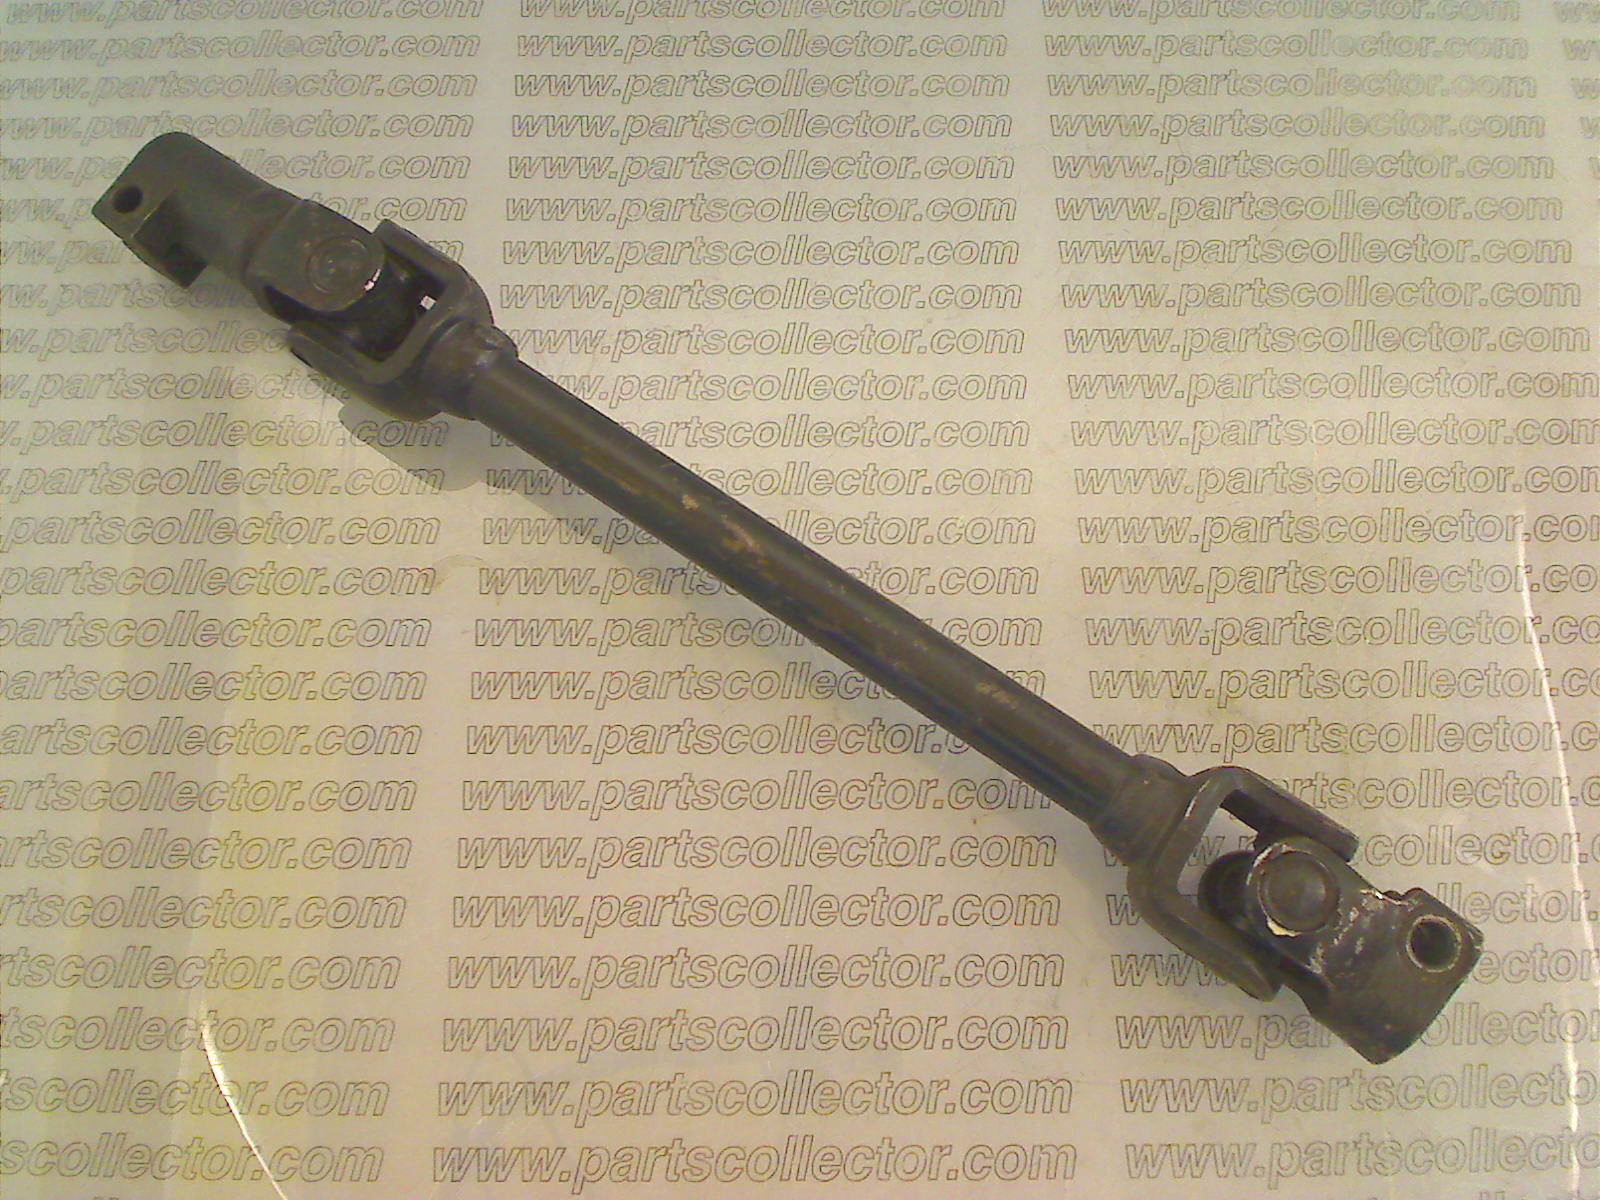 STEERING JOINT